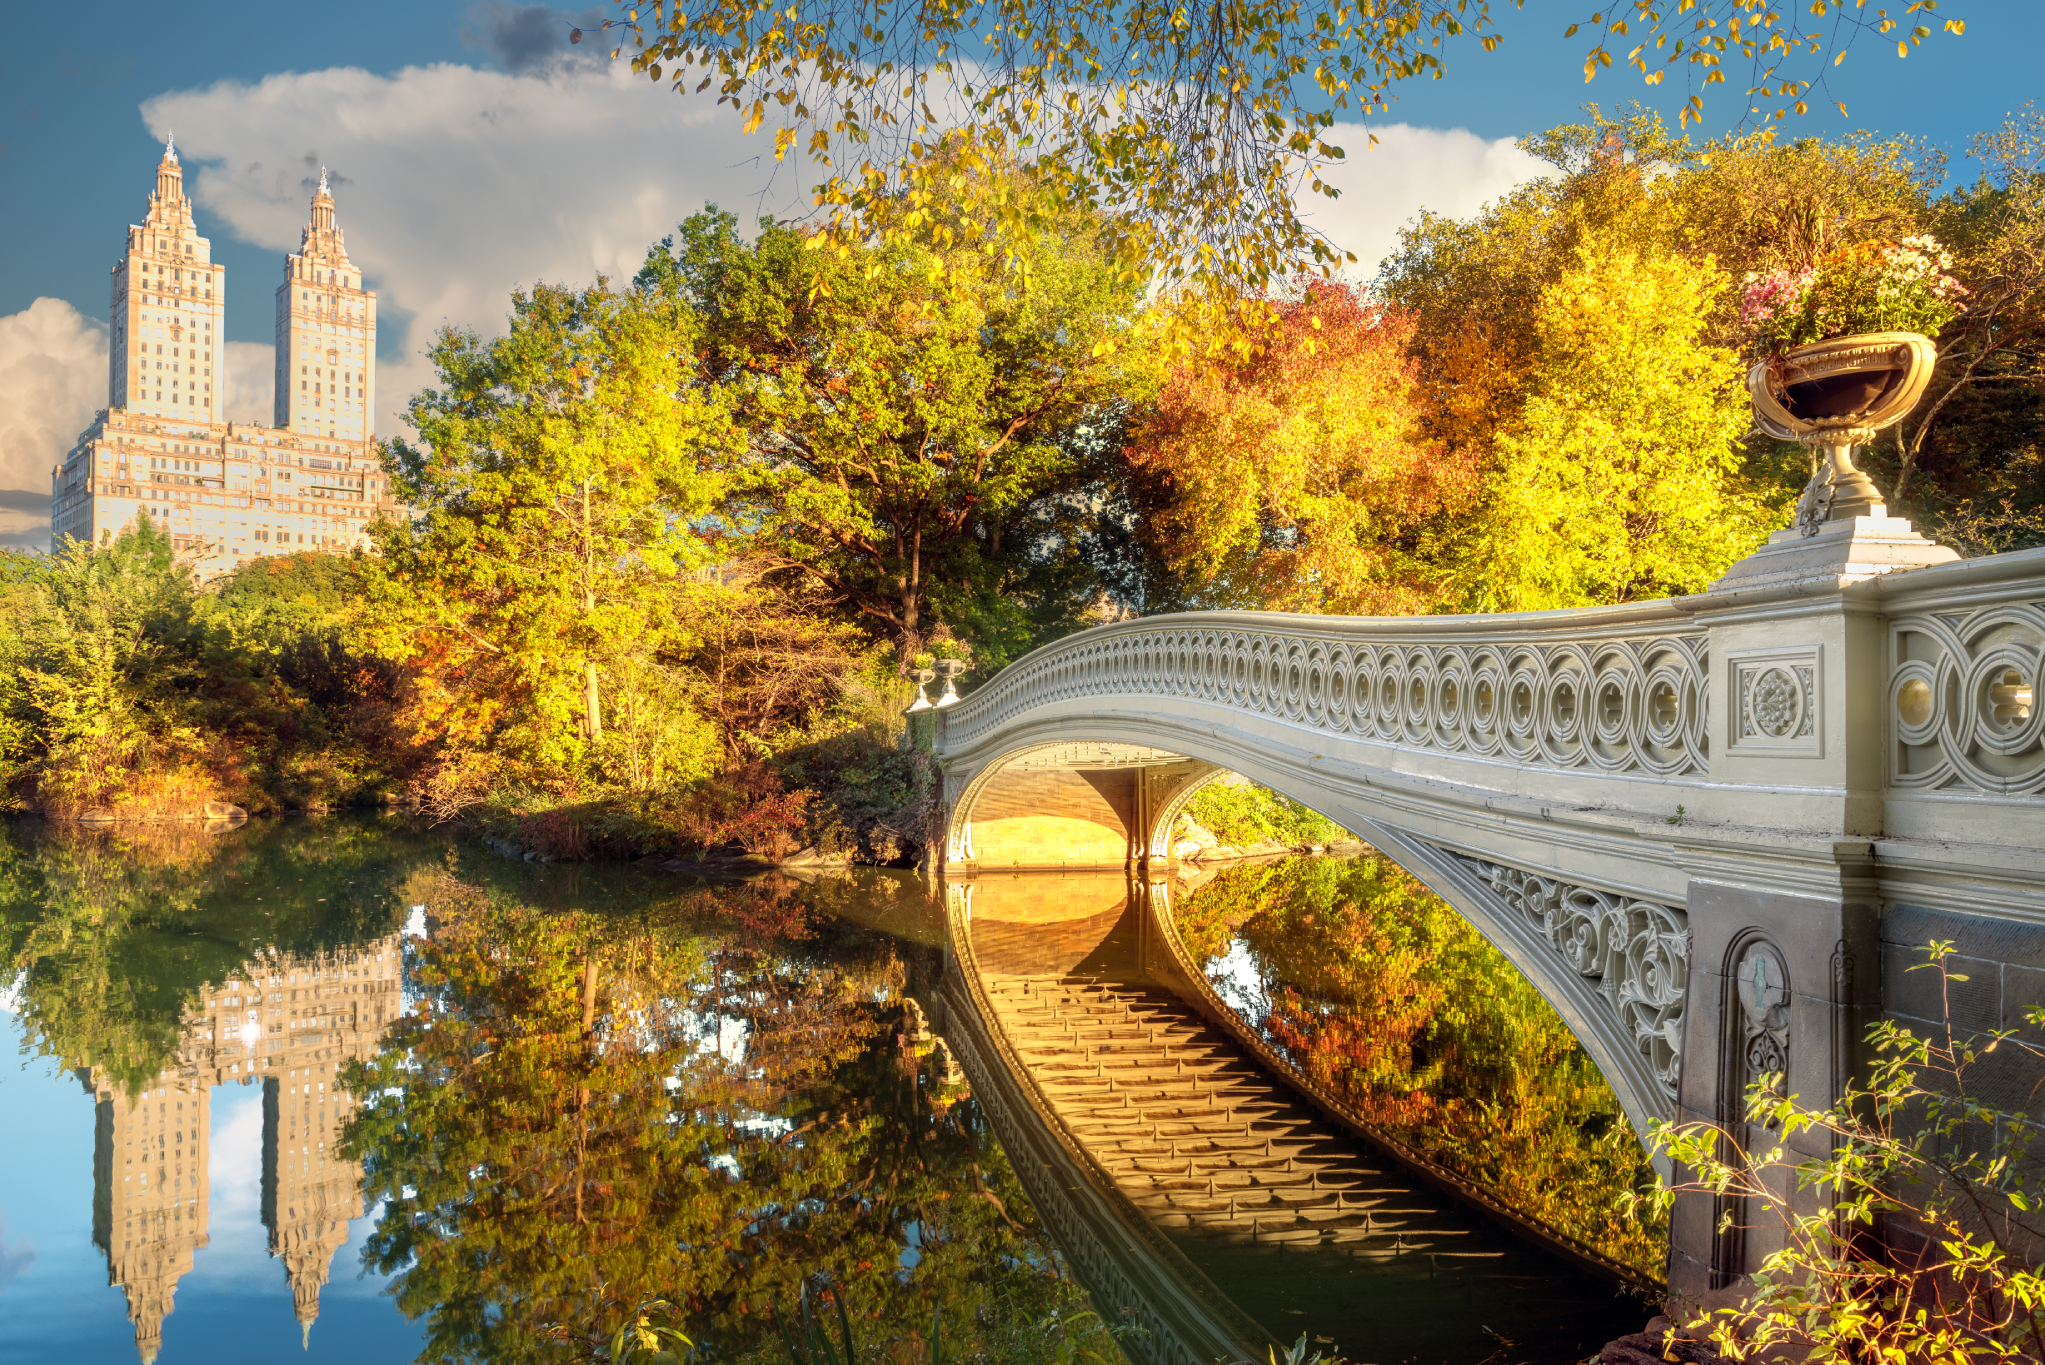 Fall activities in NYC: A guide of great things to do this autumn